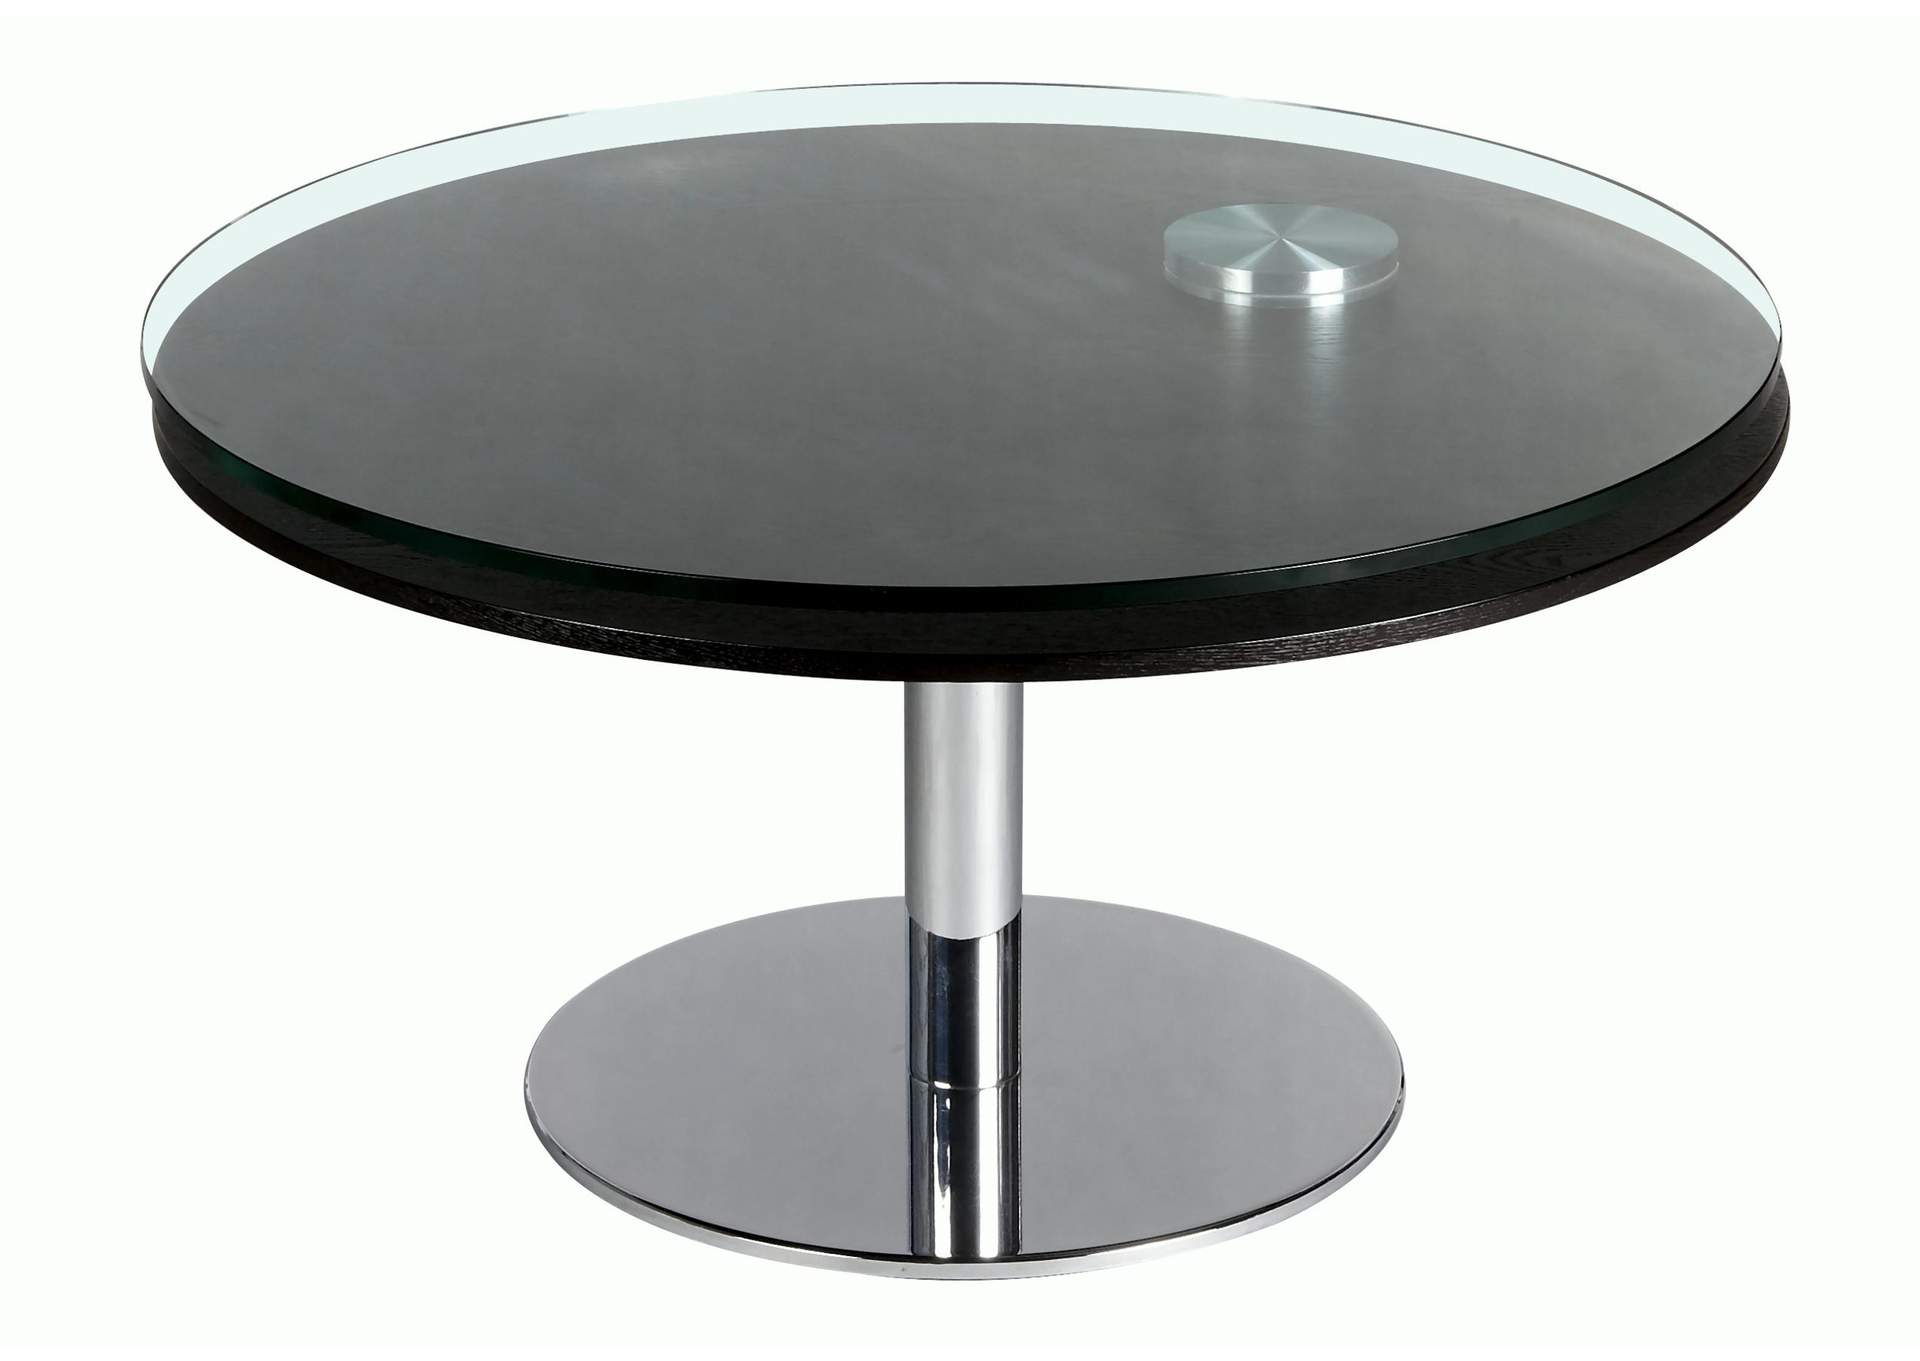 Merlot & Chrome Contemporary Glass Top Motion Cocktail Table,Chintaly Imports